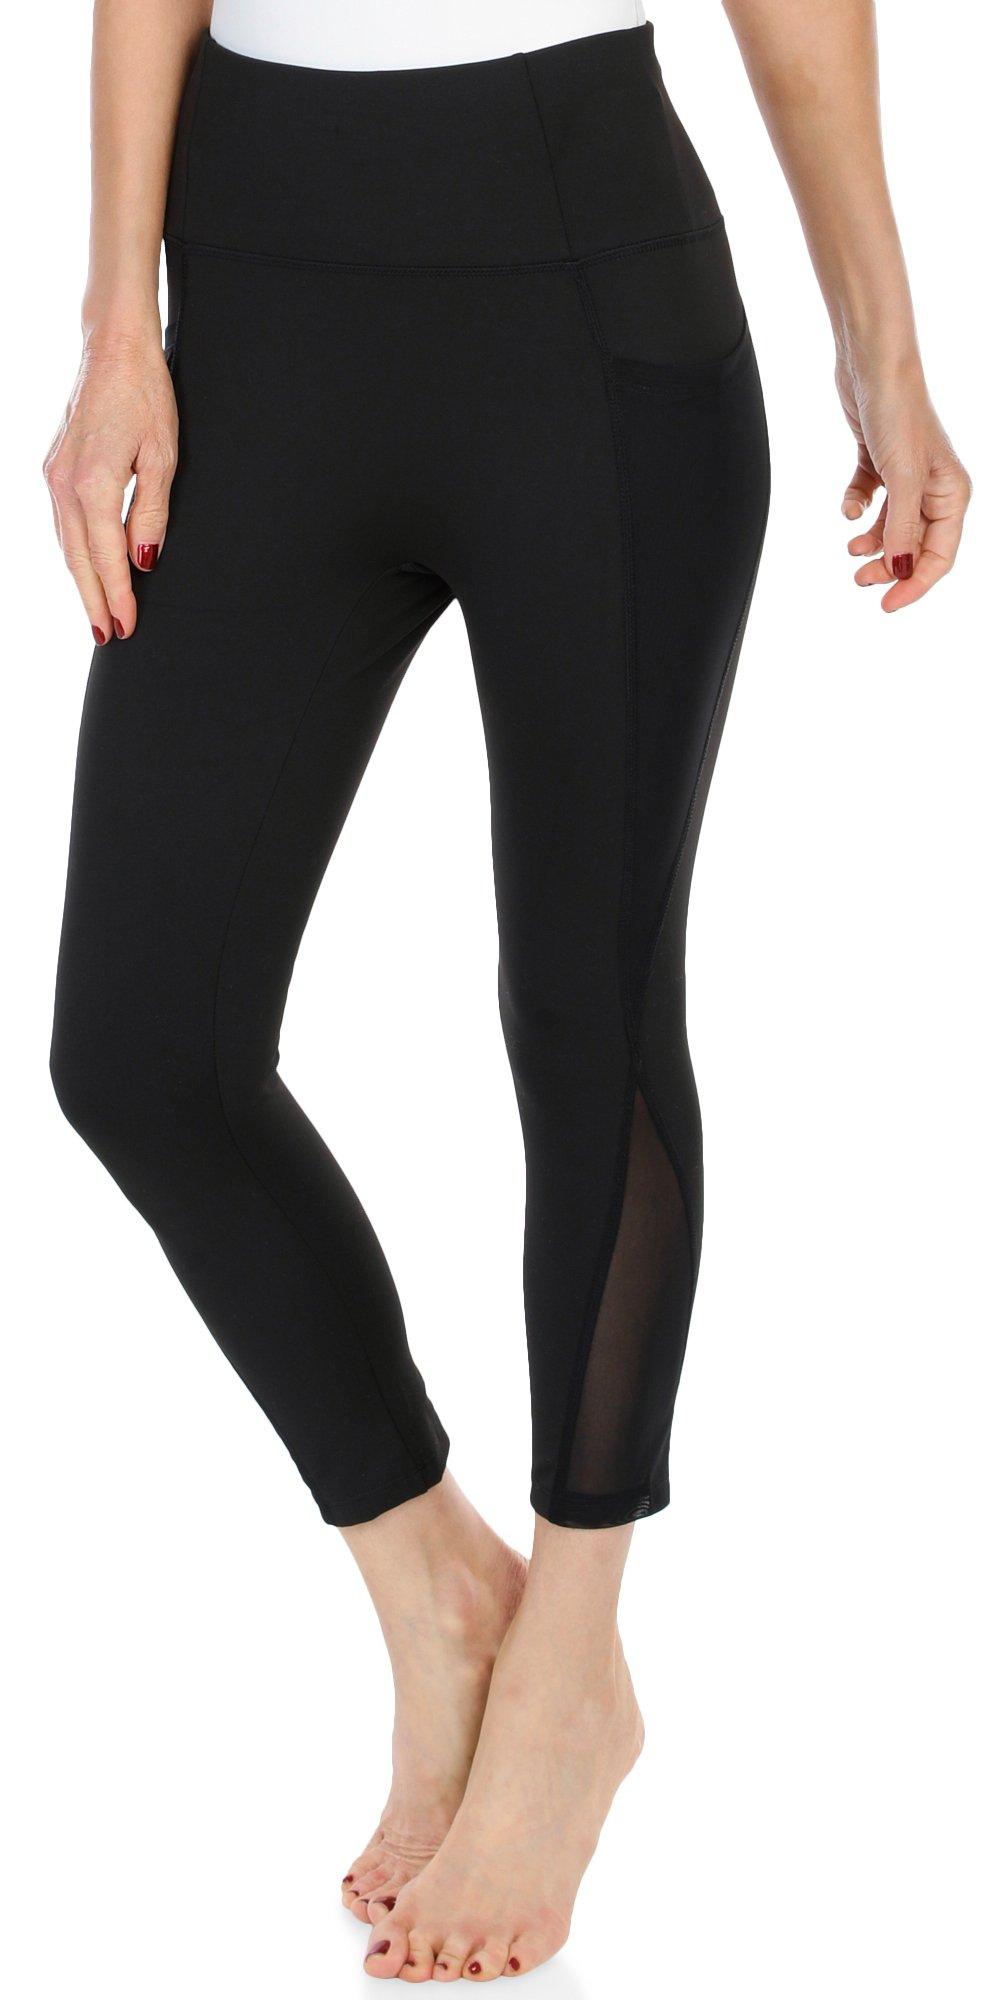 Kyodan Leggings - Black with Gray Accent